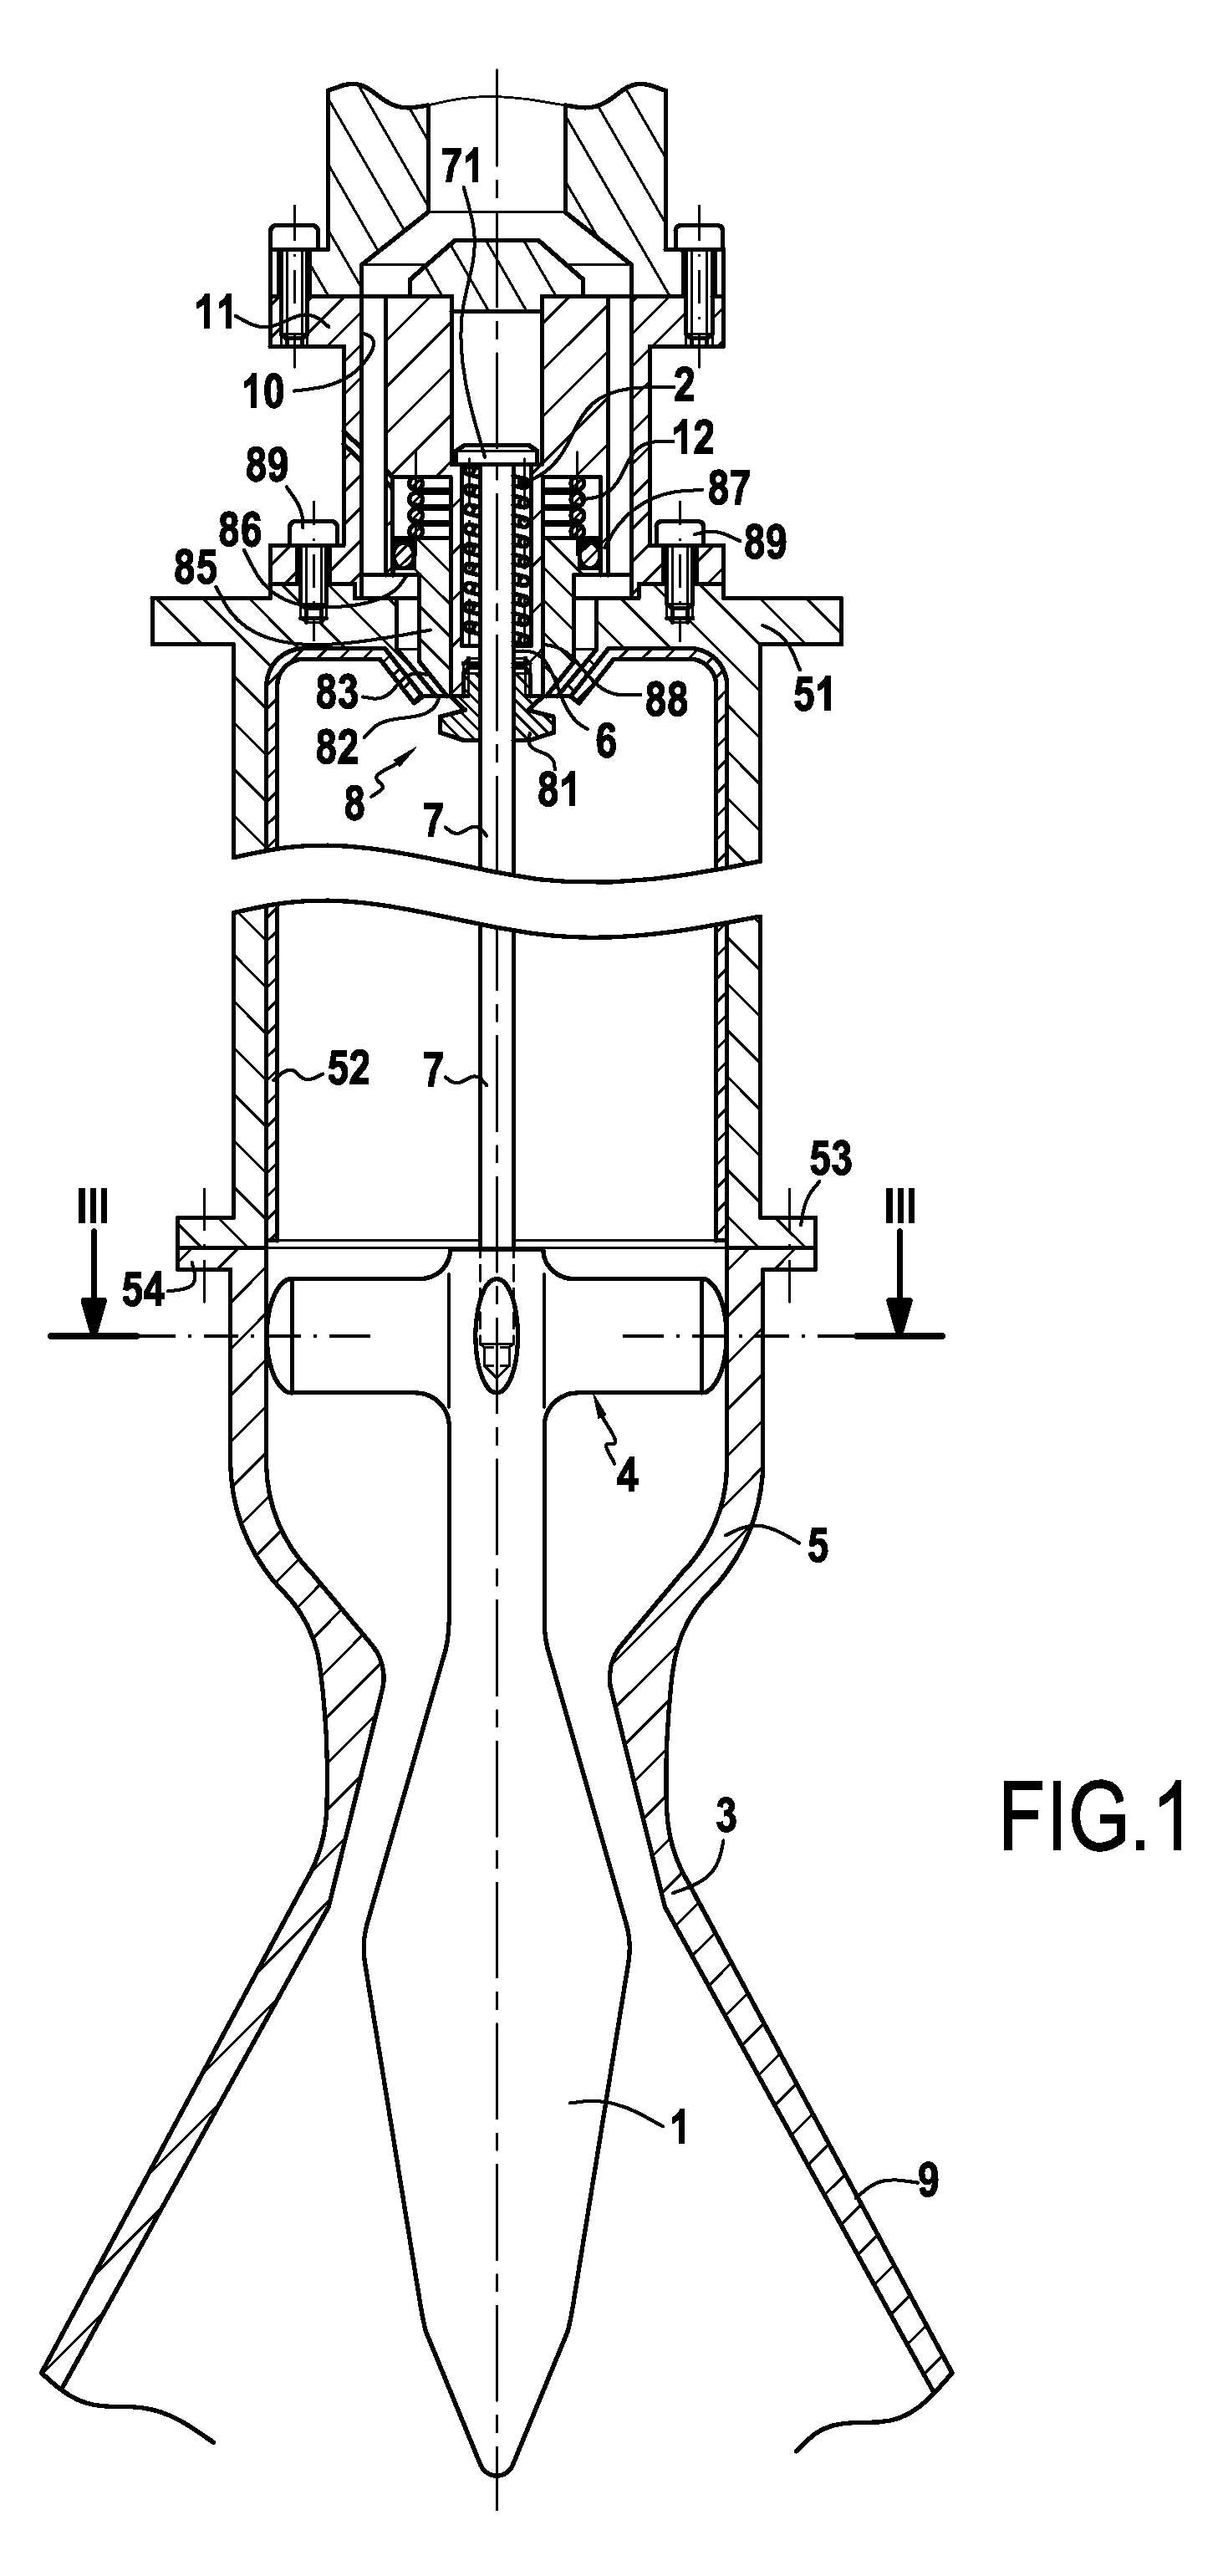 Liquid propellant rocket engine with a propulsion chamber shutter